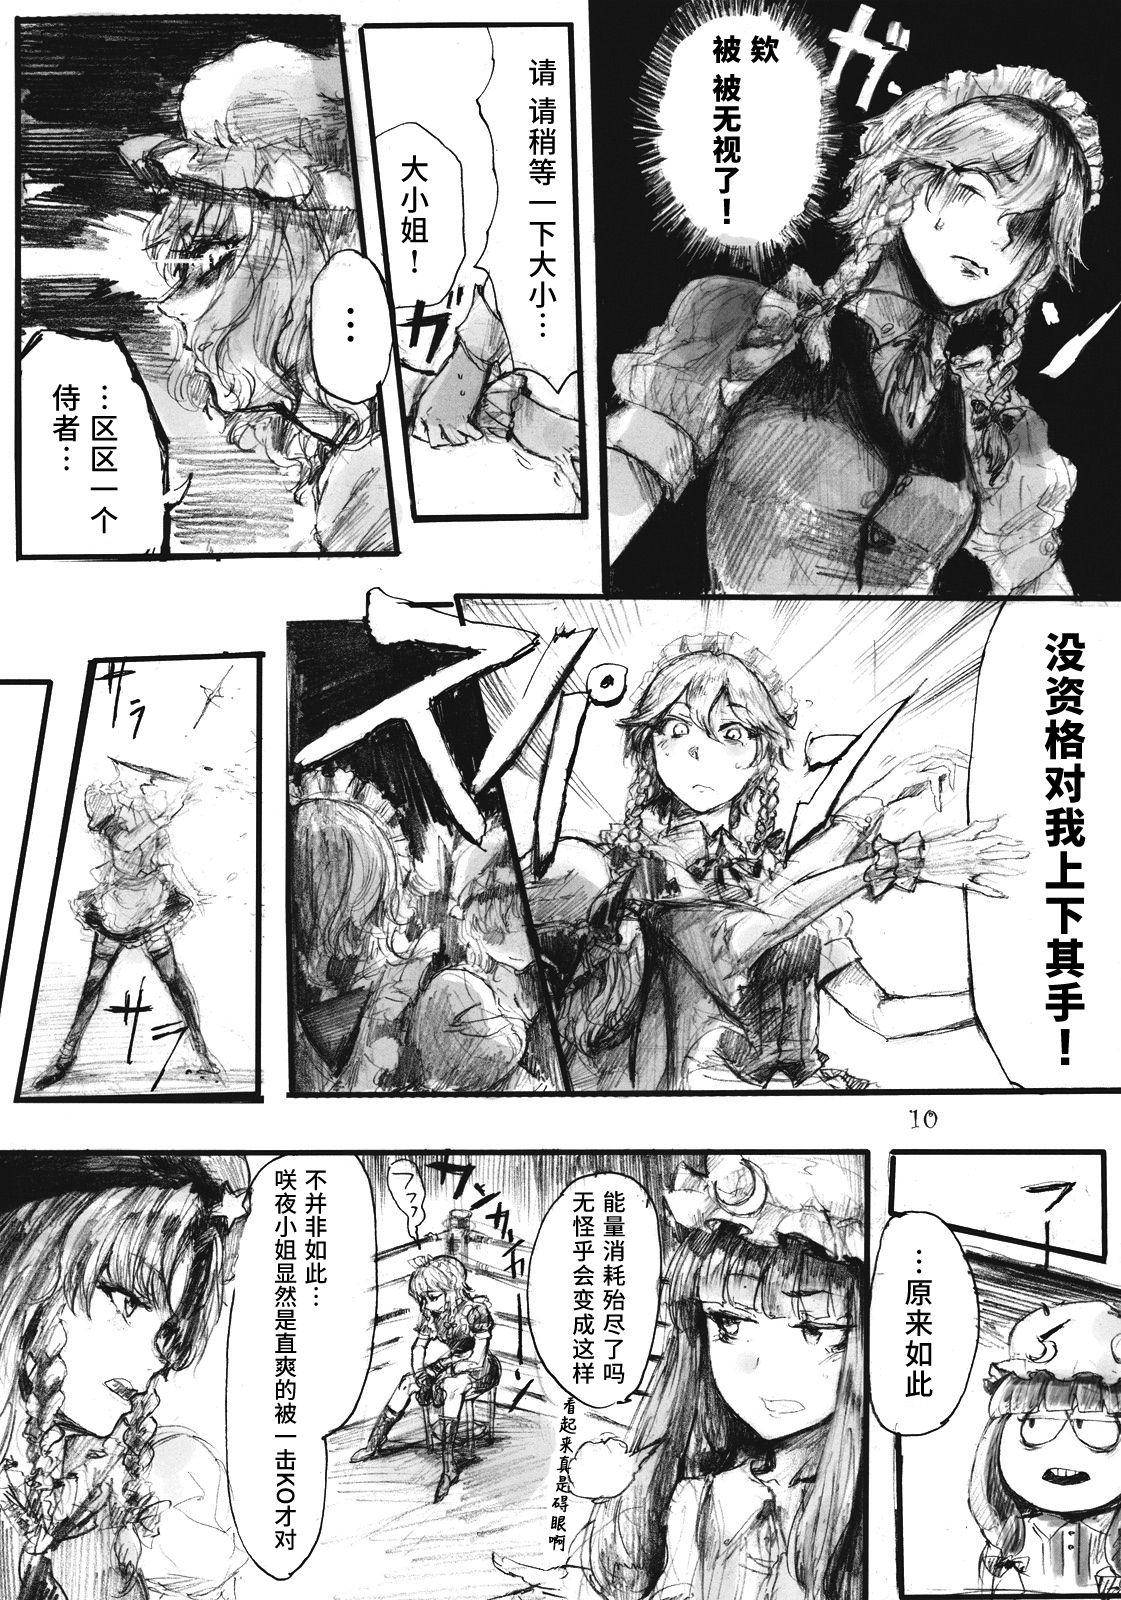 Banheiro SEMPER EADEM - Touhou project Bisexual - Page 10